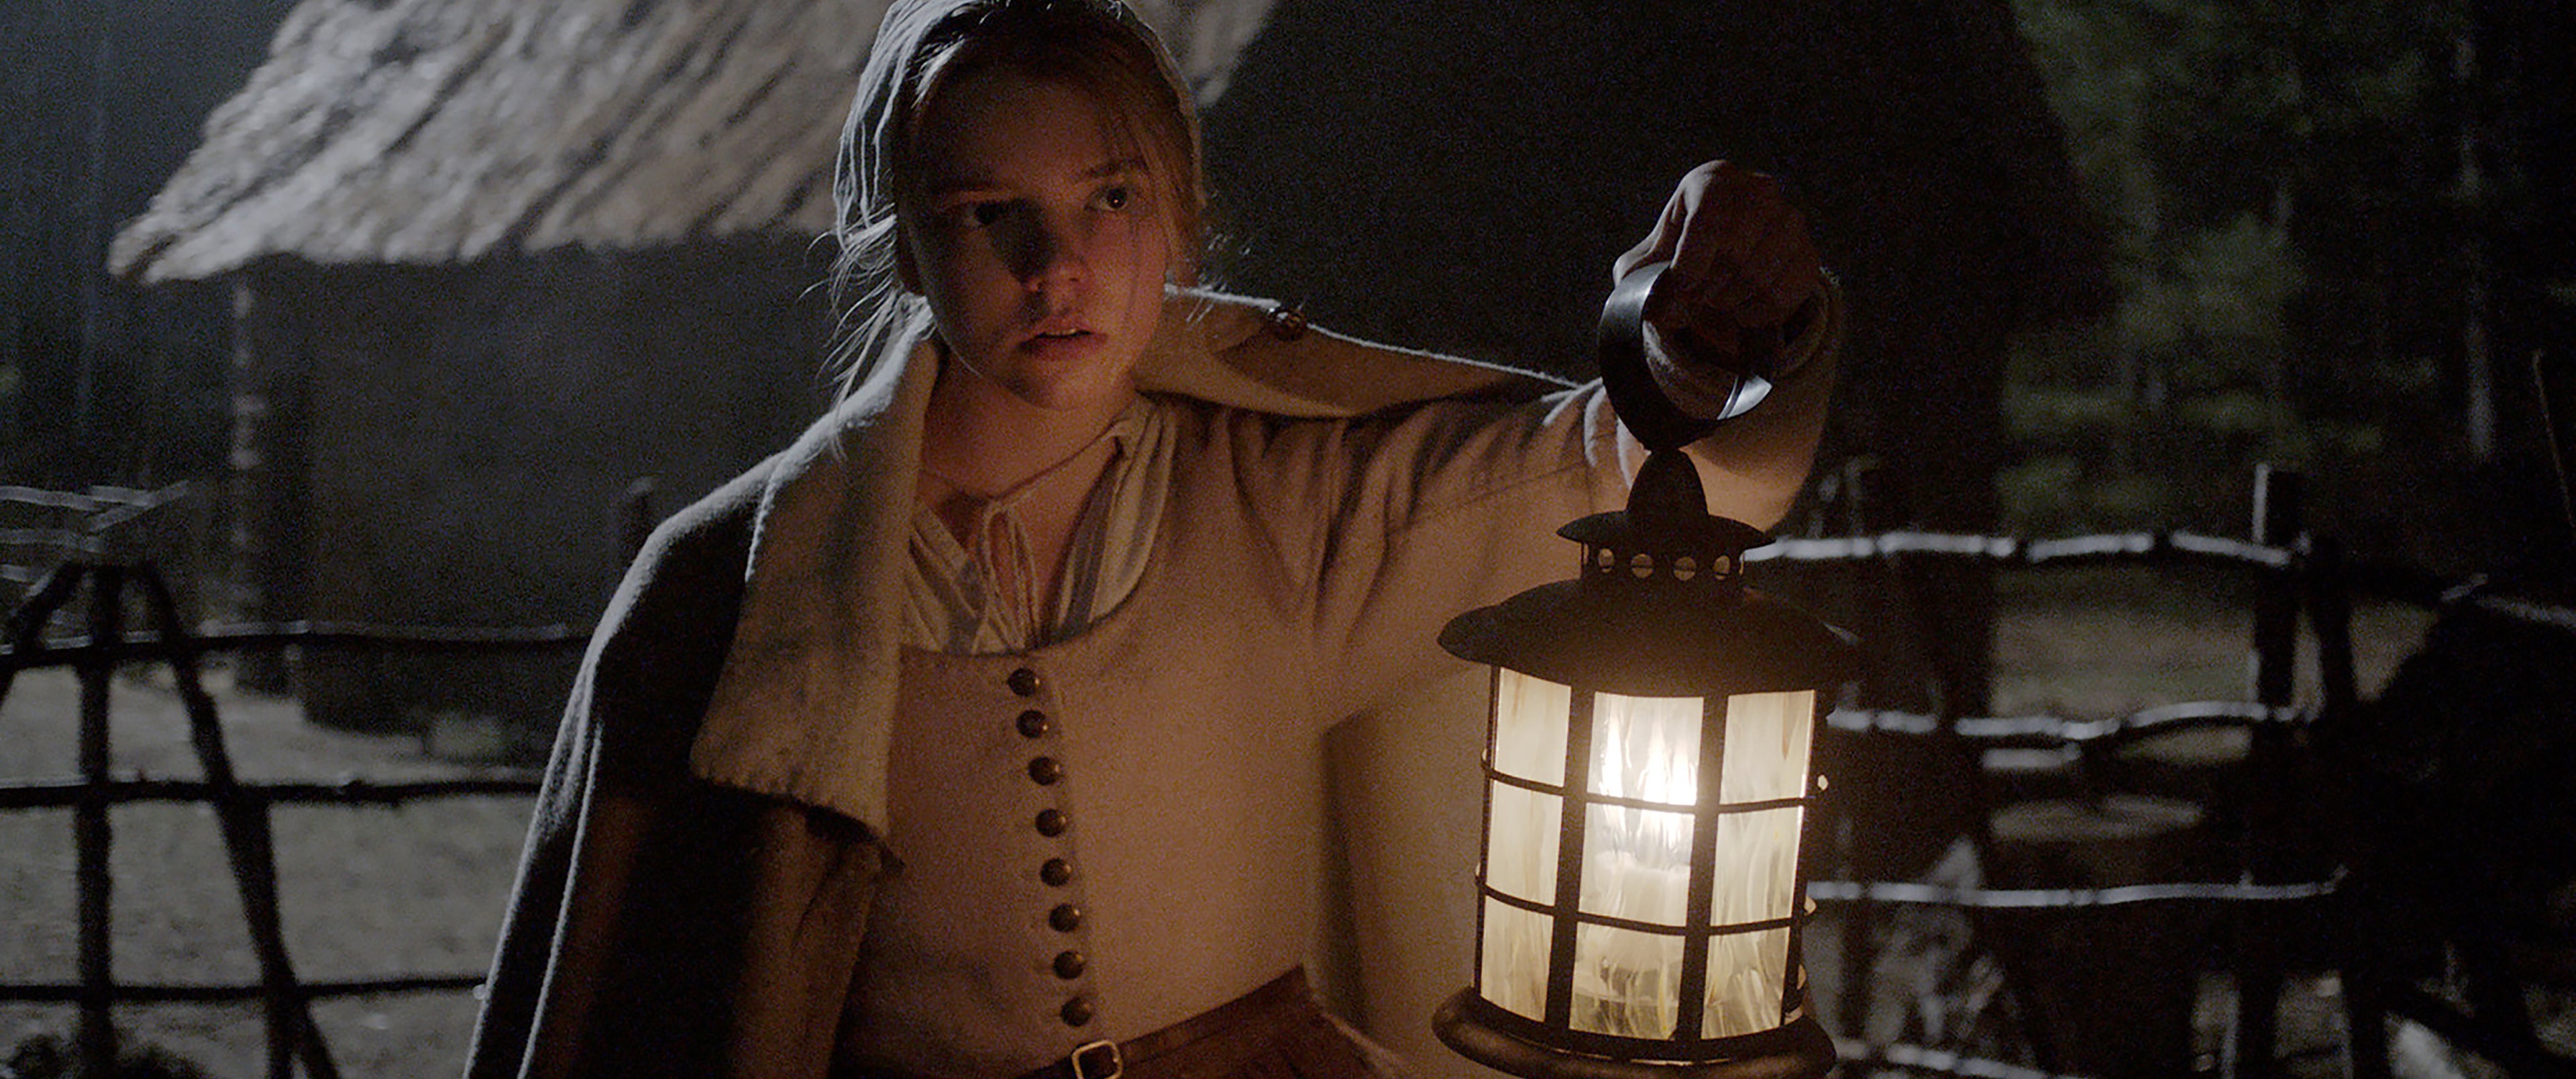 Still image from The Witch. Anya Taylor Joy carries a lantern in the dark.